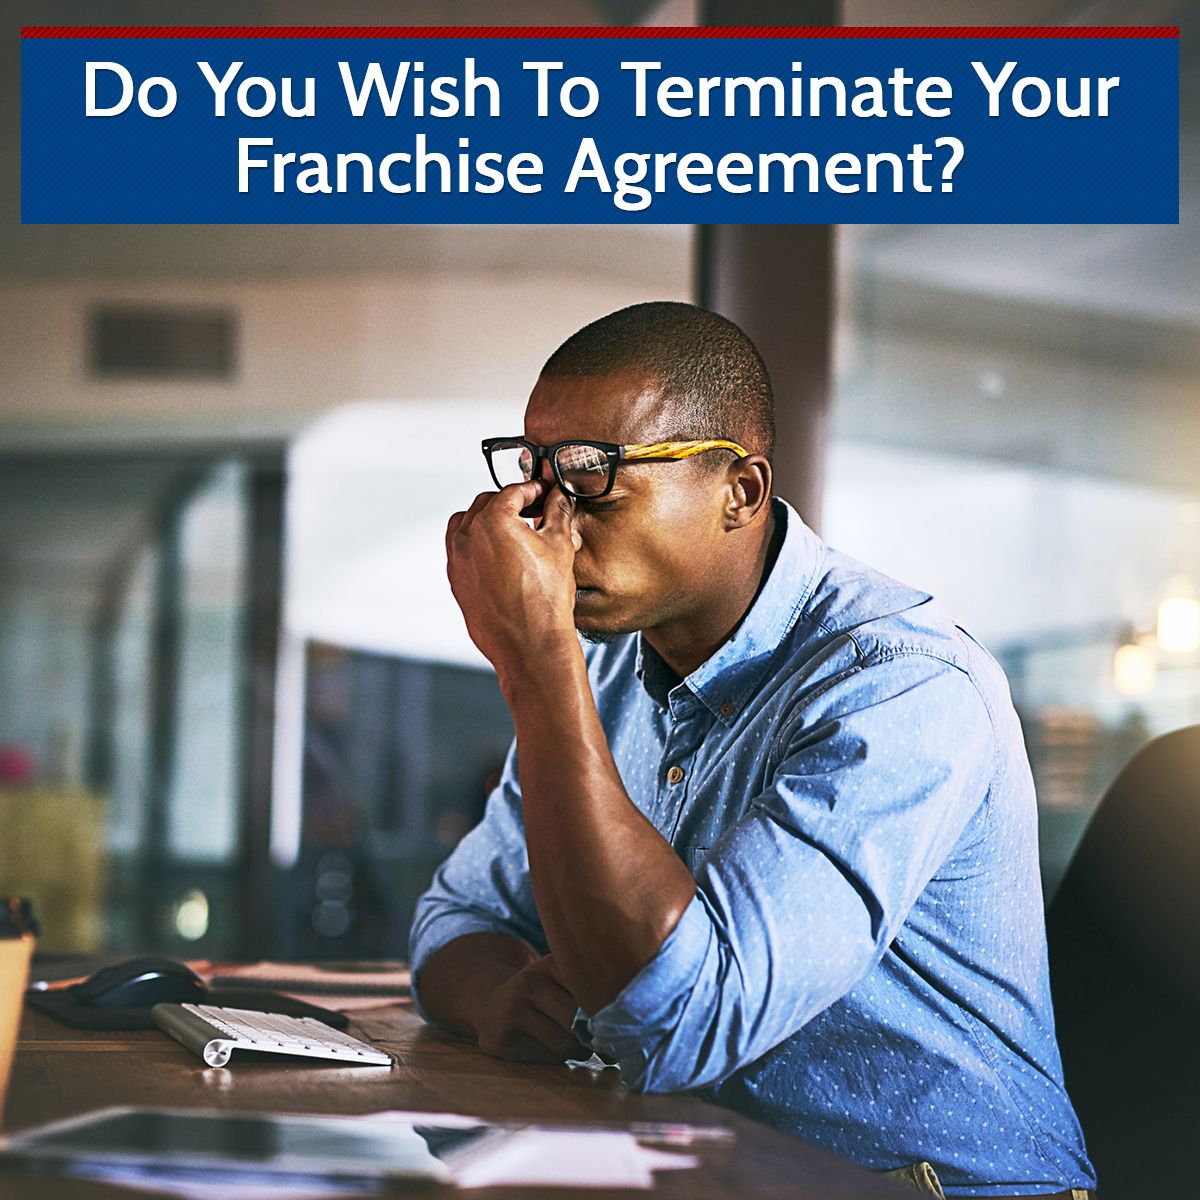 Do You Wish To Terminate Your Franchise Agreement?